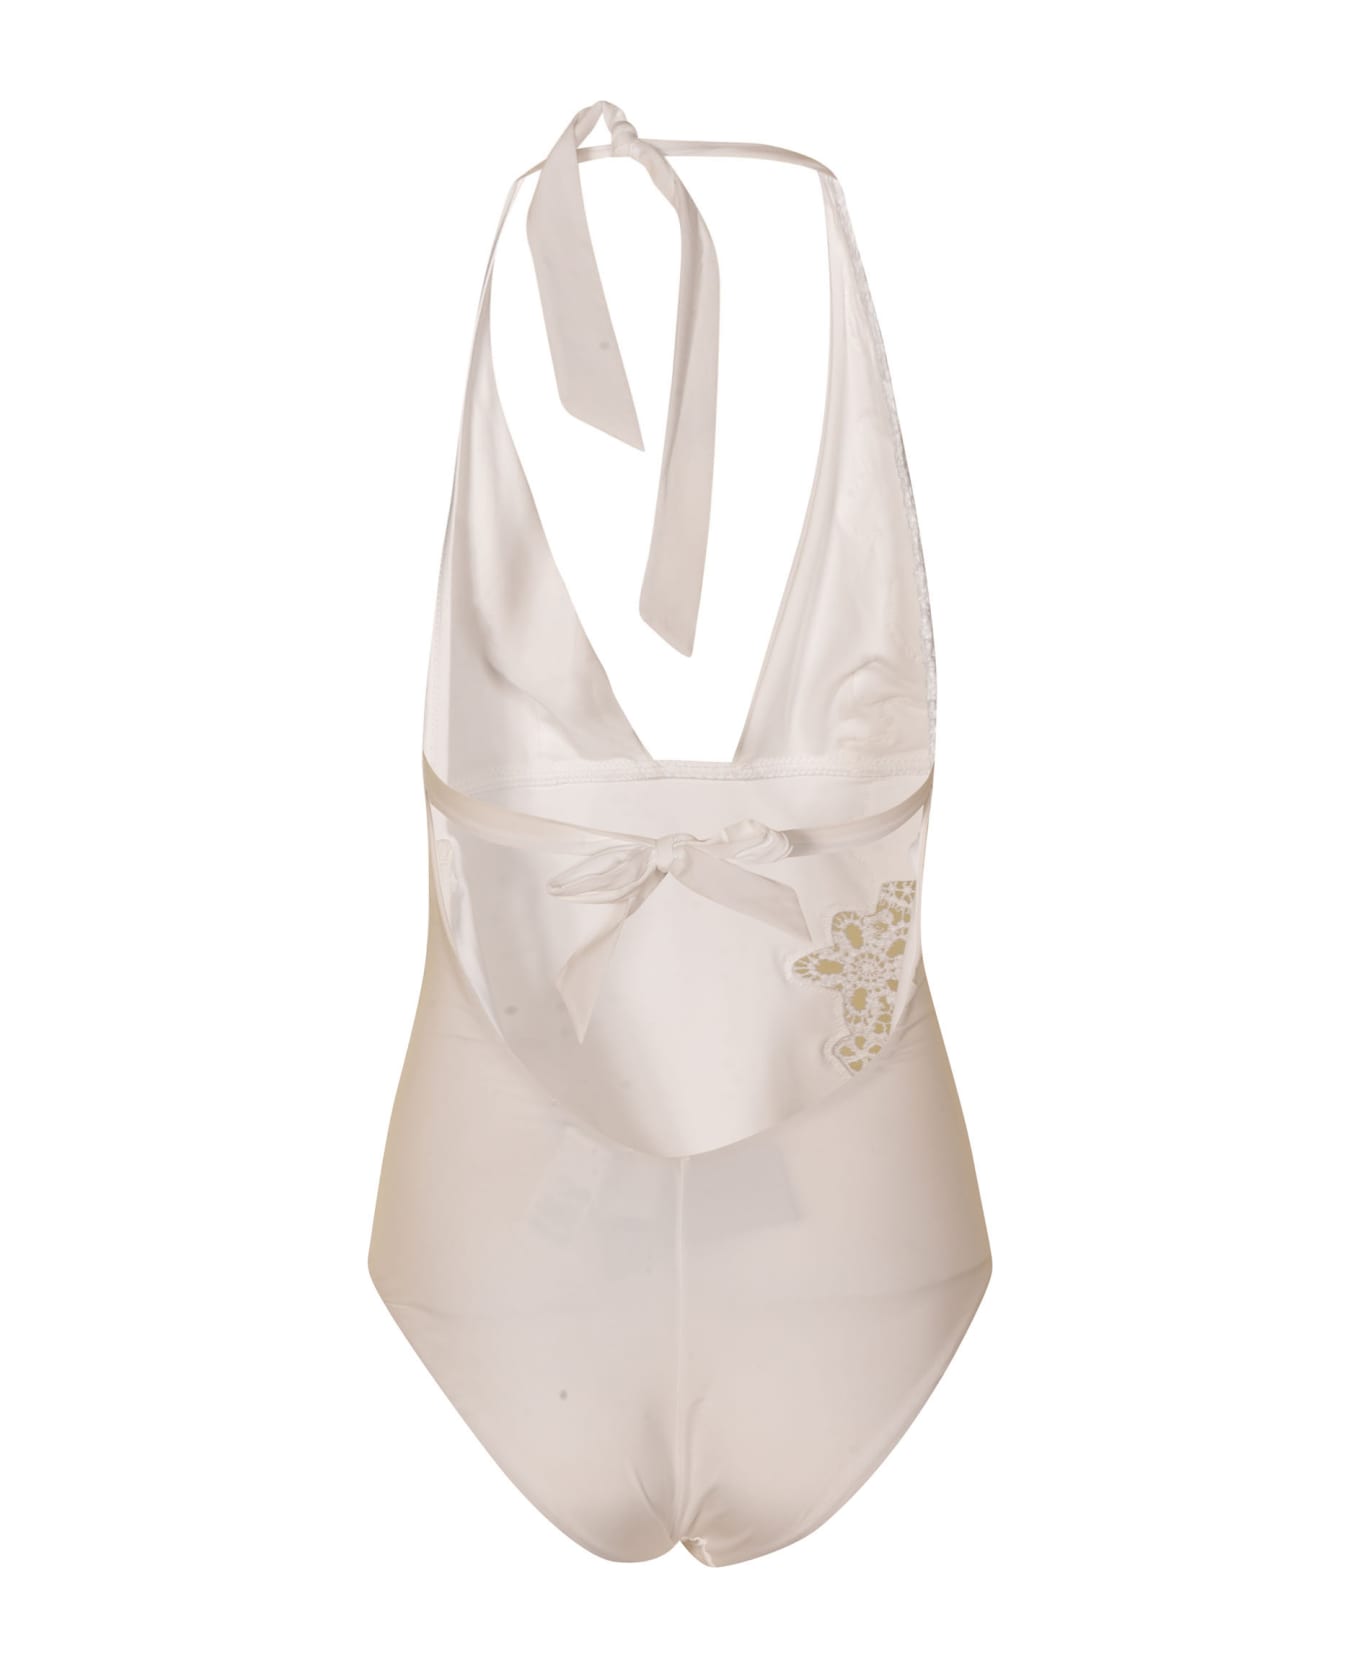 Ermanno Scervino Floral Perforated Swimsuit - White 水着